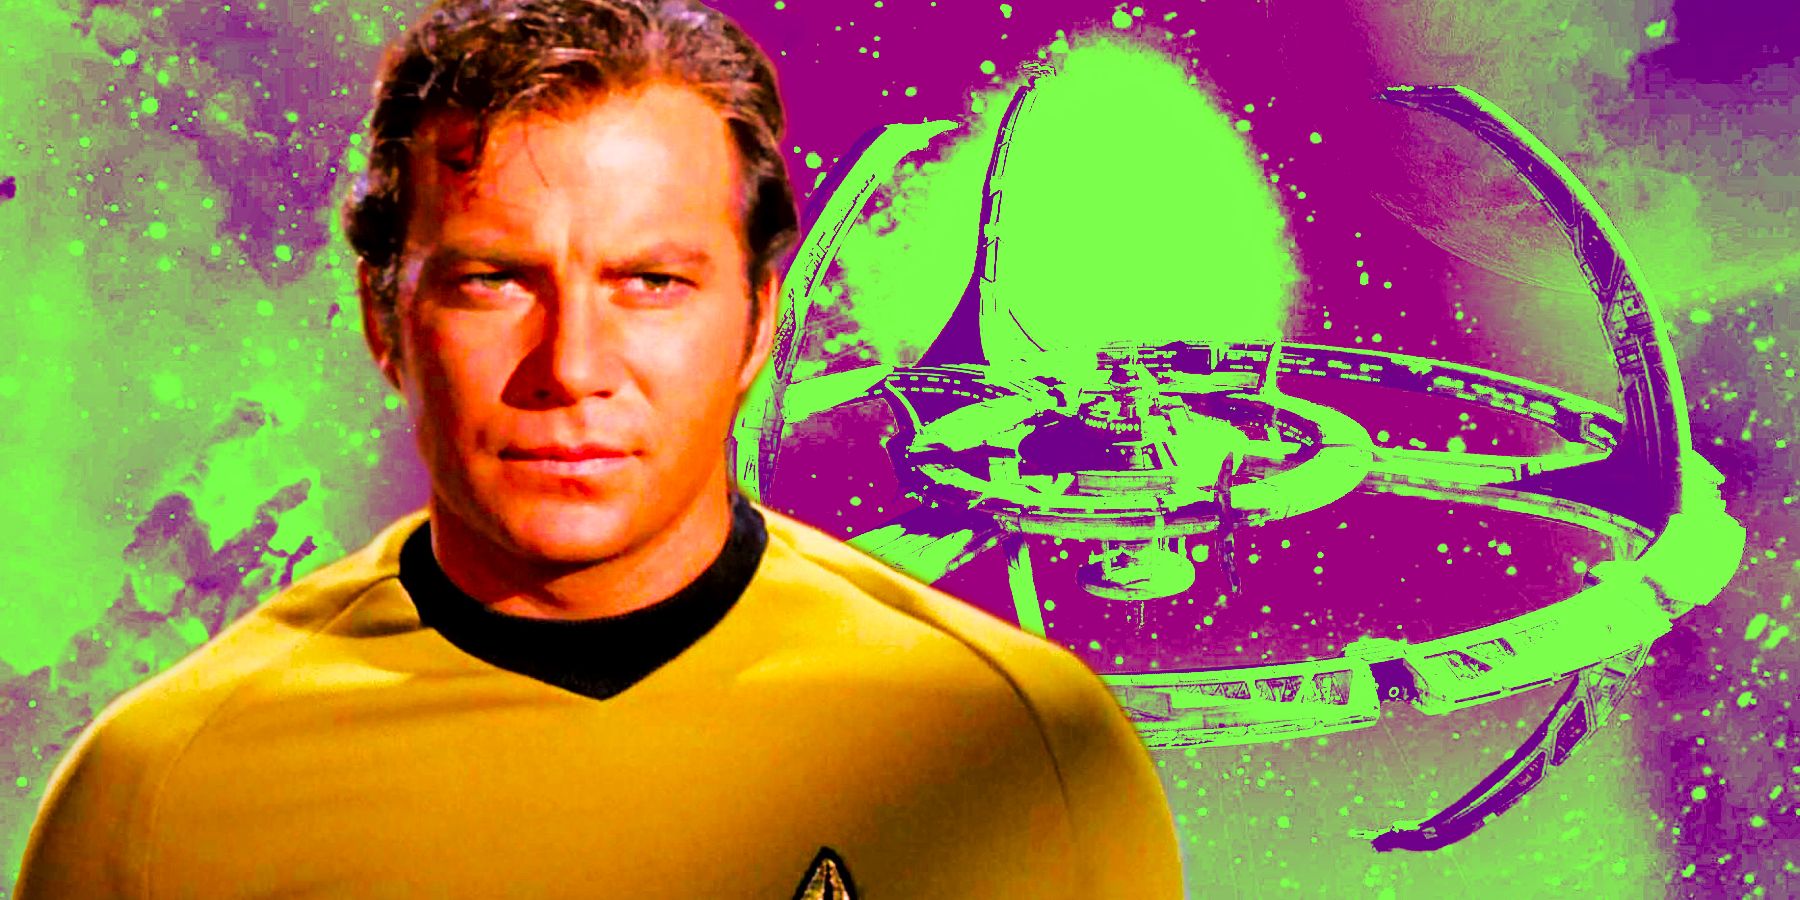 William Shatner as Captain Kirk with Deep Space Nine as a backdrop